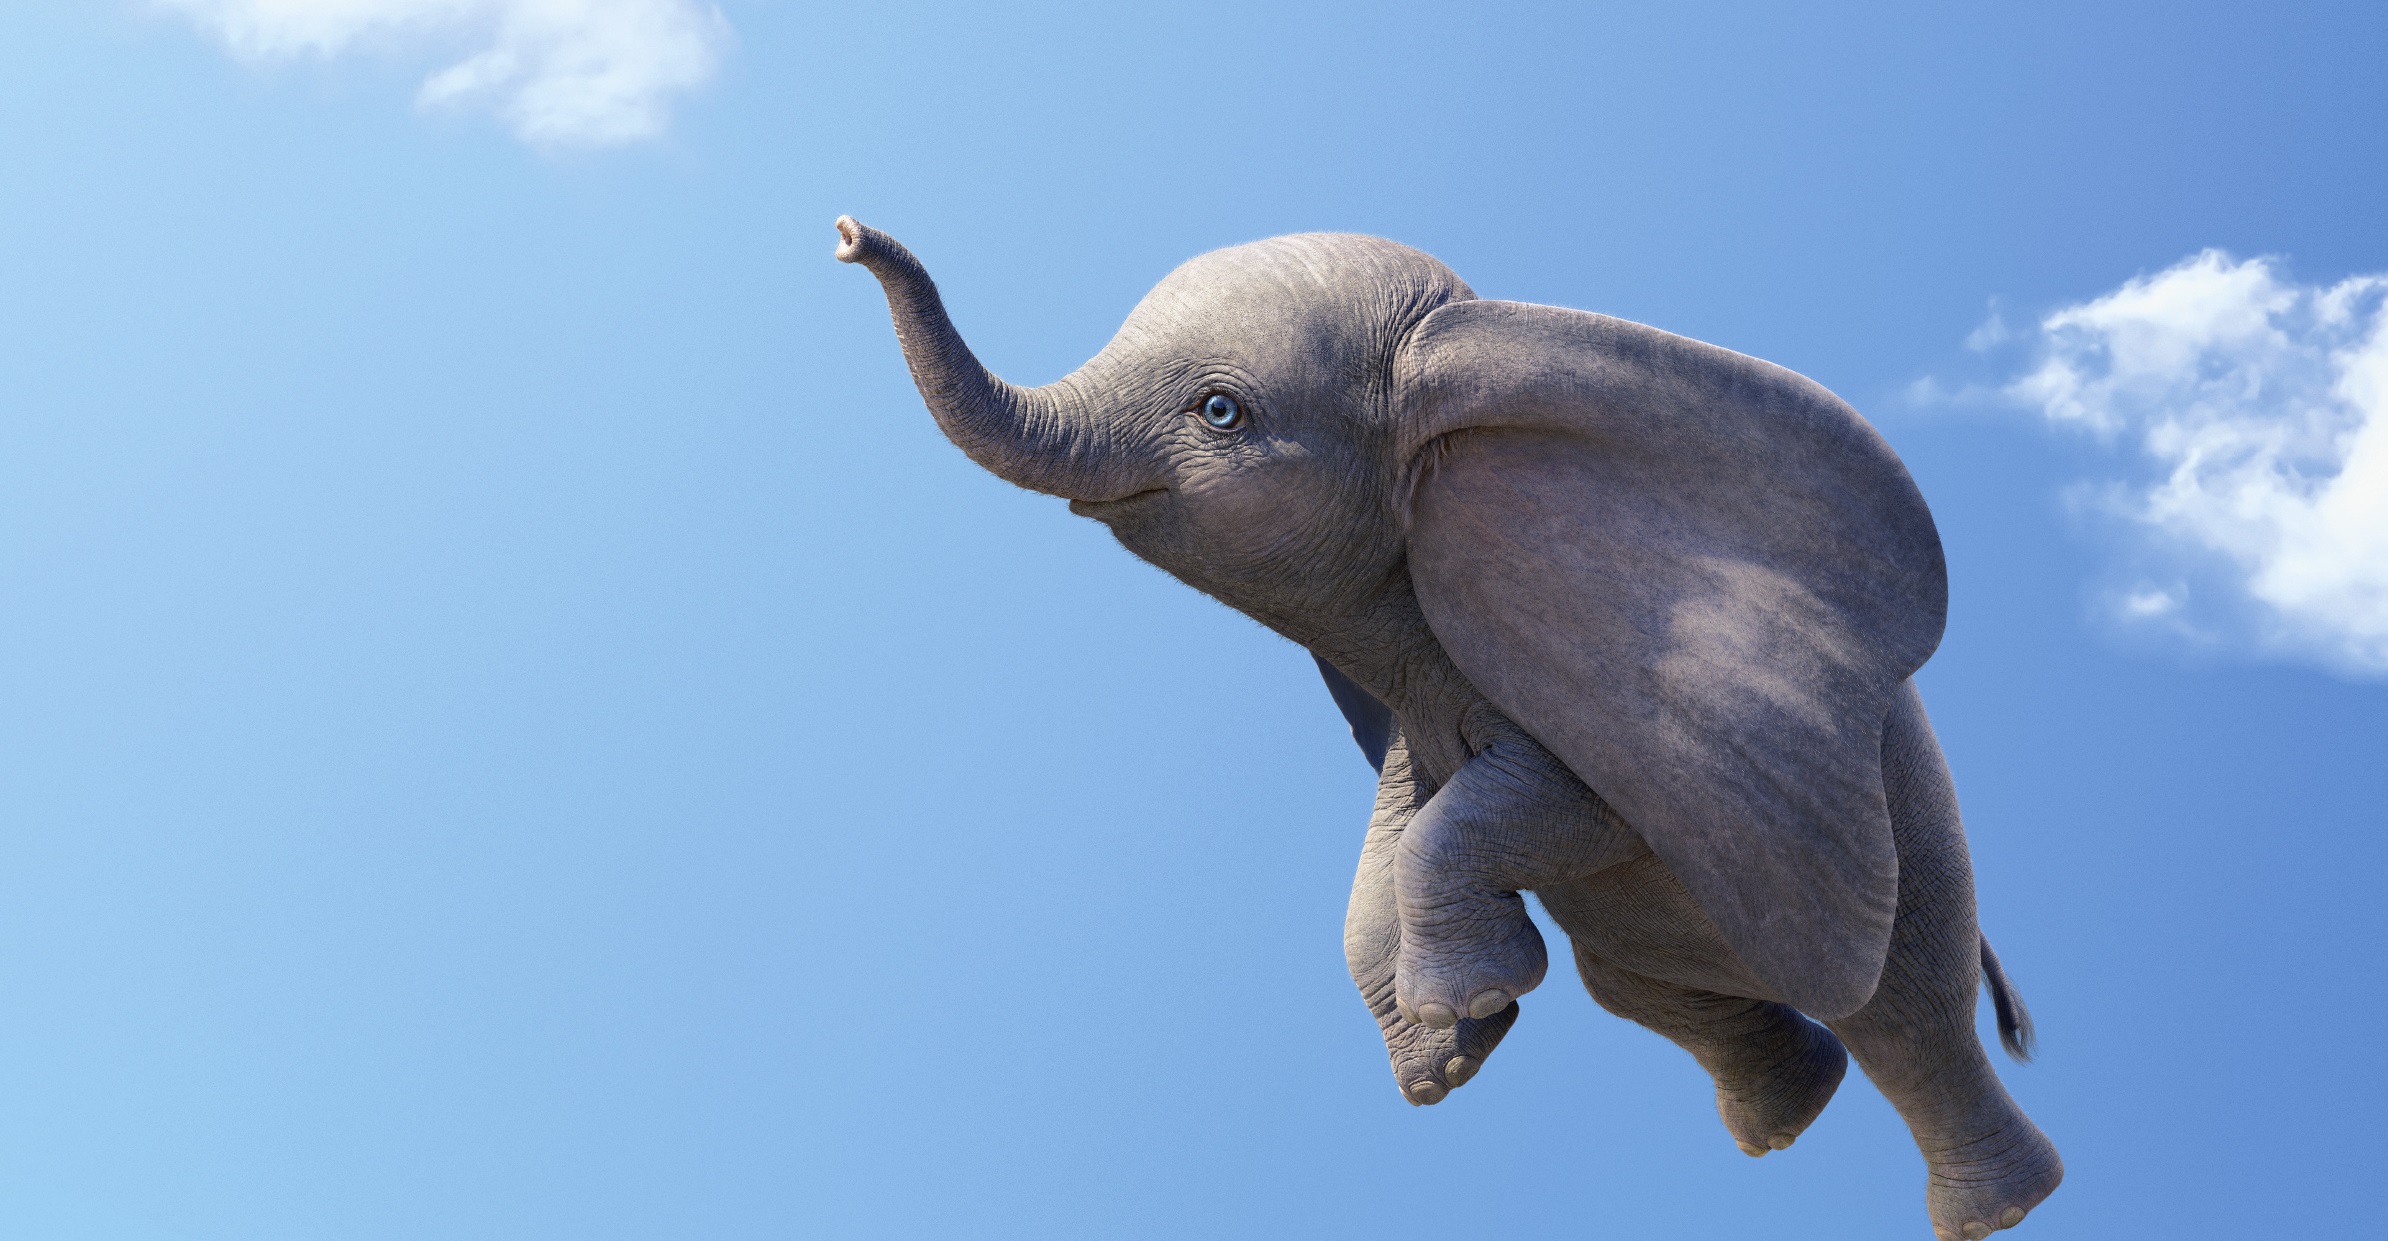 [News] DUMBO Takes You into Dreamland with New Featurette